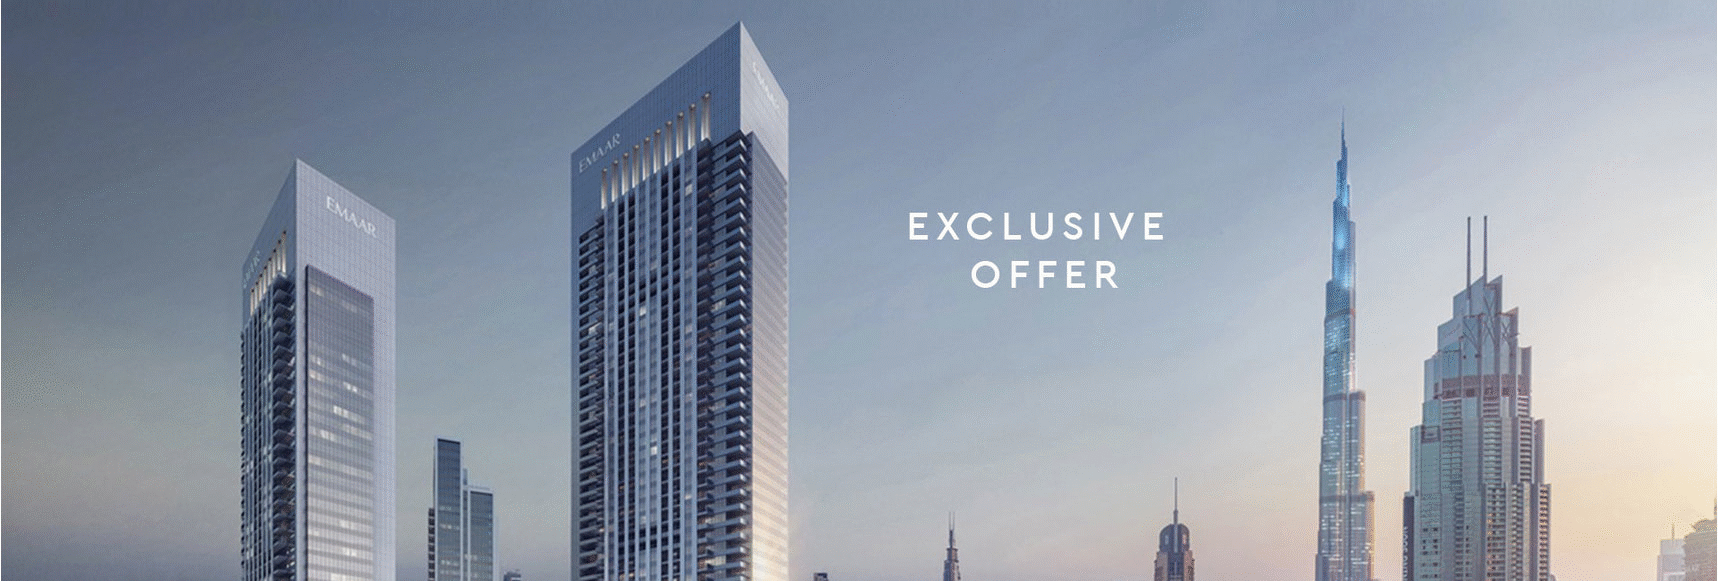 Downtown Views 2 Exclusive Offer